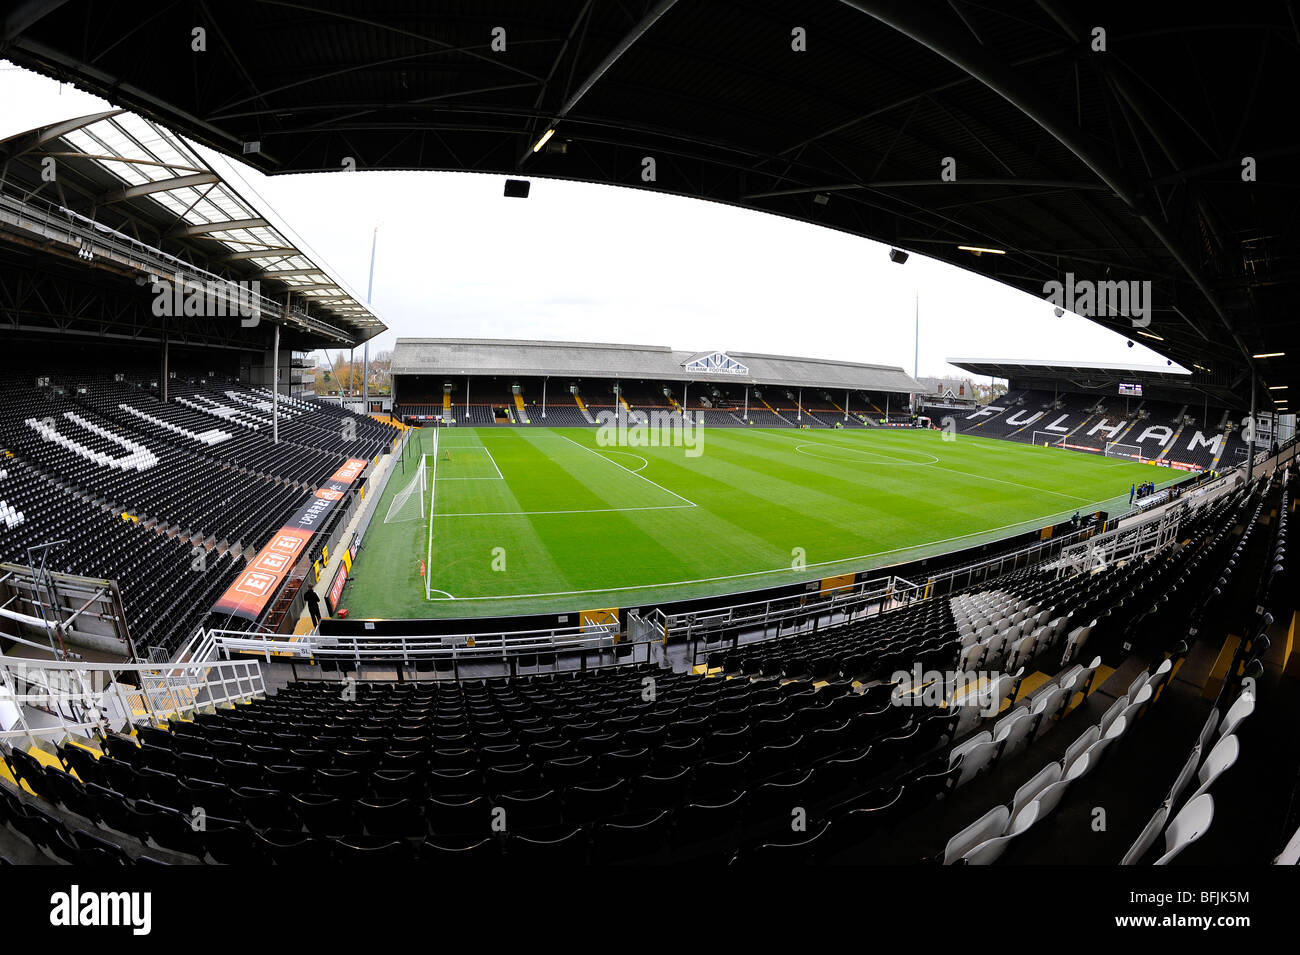 View inside Craven Cottage Stadium, home of Fulham Football Club Stock Photo